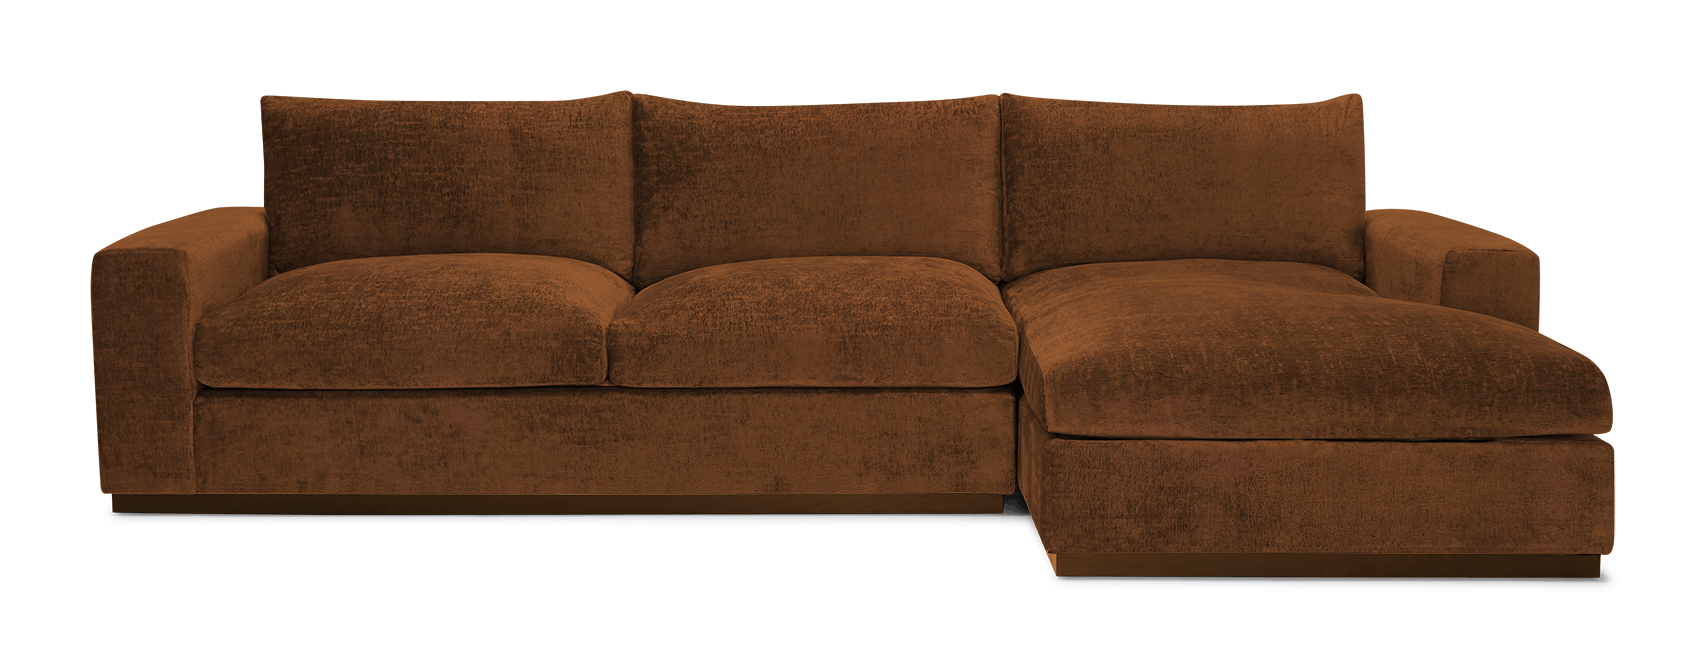 holt sectional with storage bubbly moscow mule